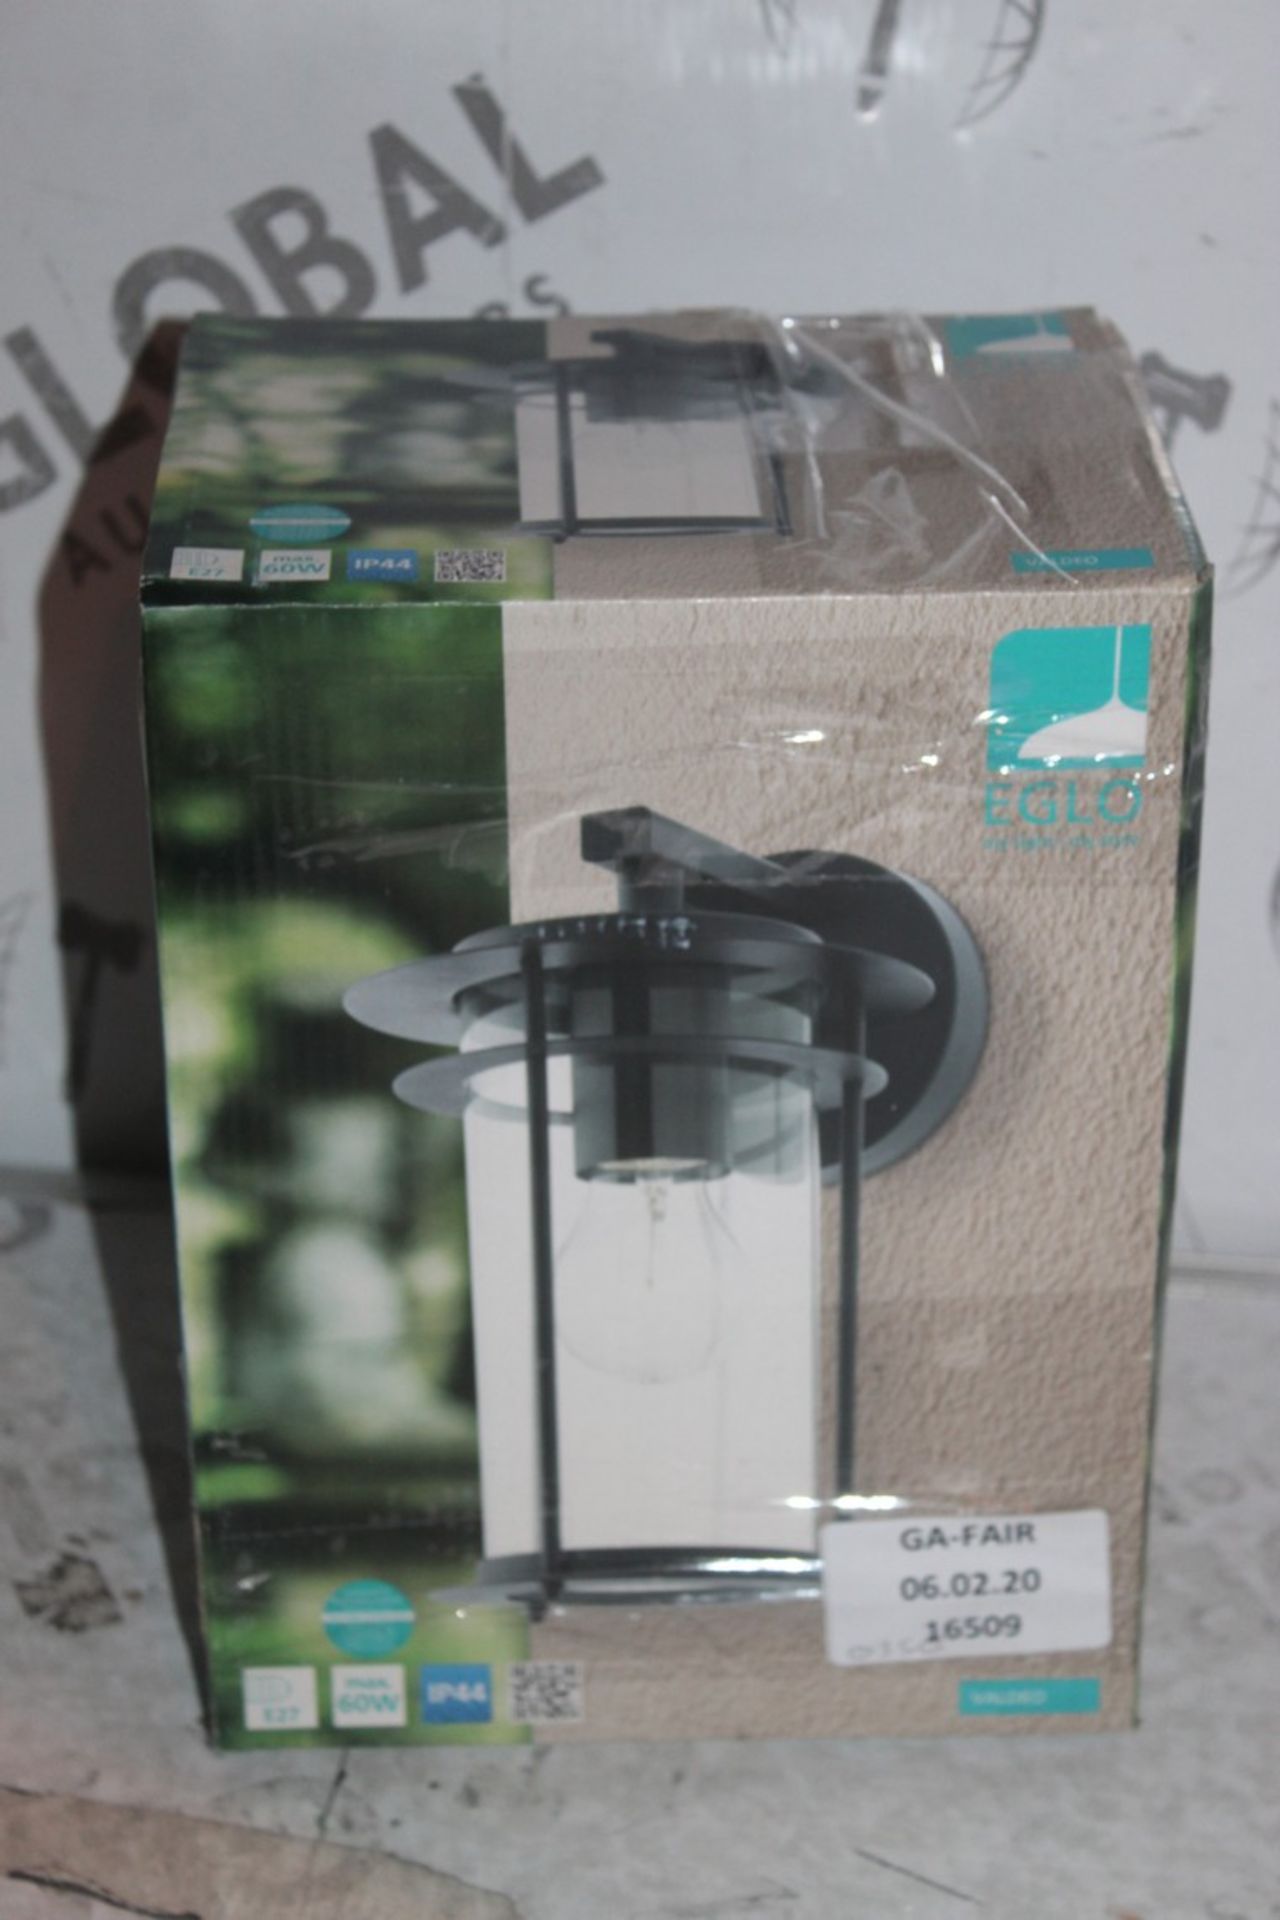 Boxed Eglo, Millside Outdoor Wall, Lanterns, Combined RRP£70.00 (16509) (Public Viewing and